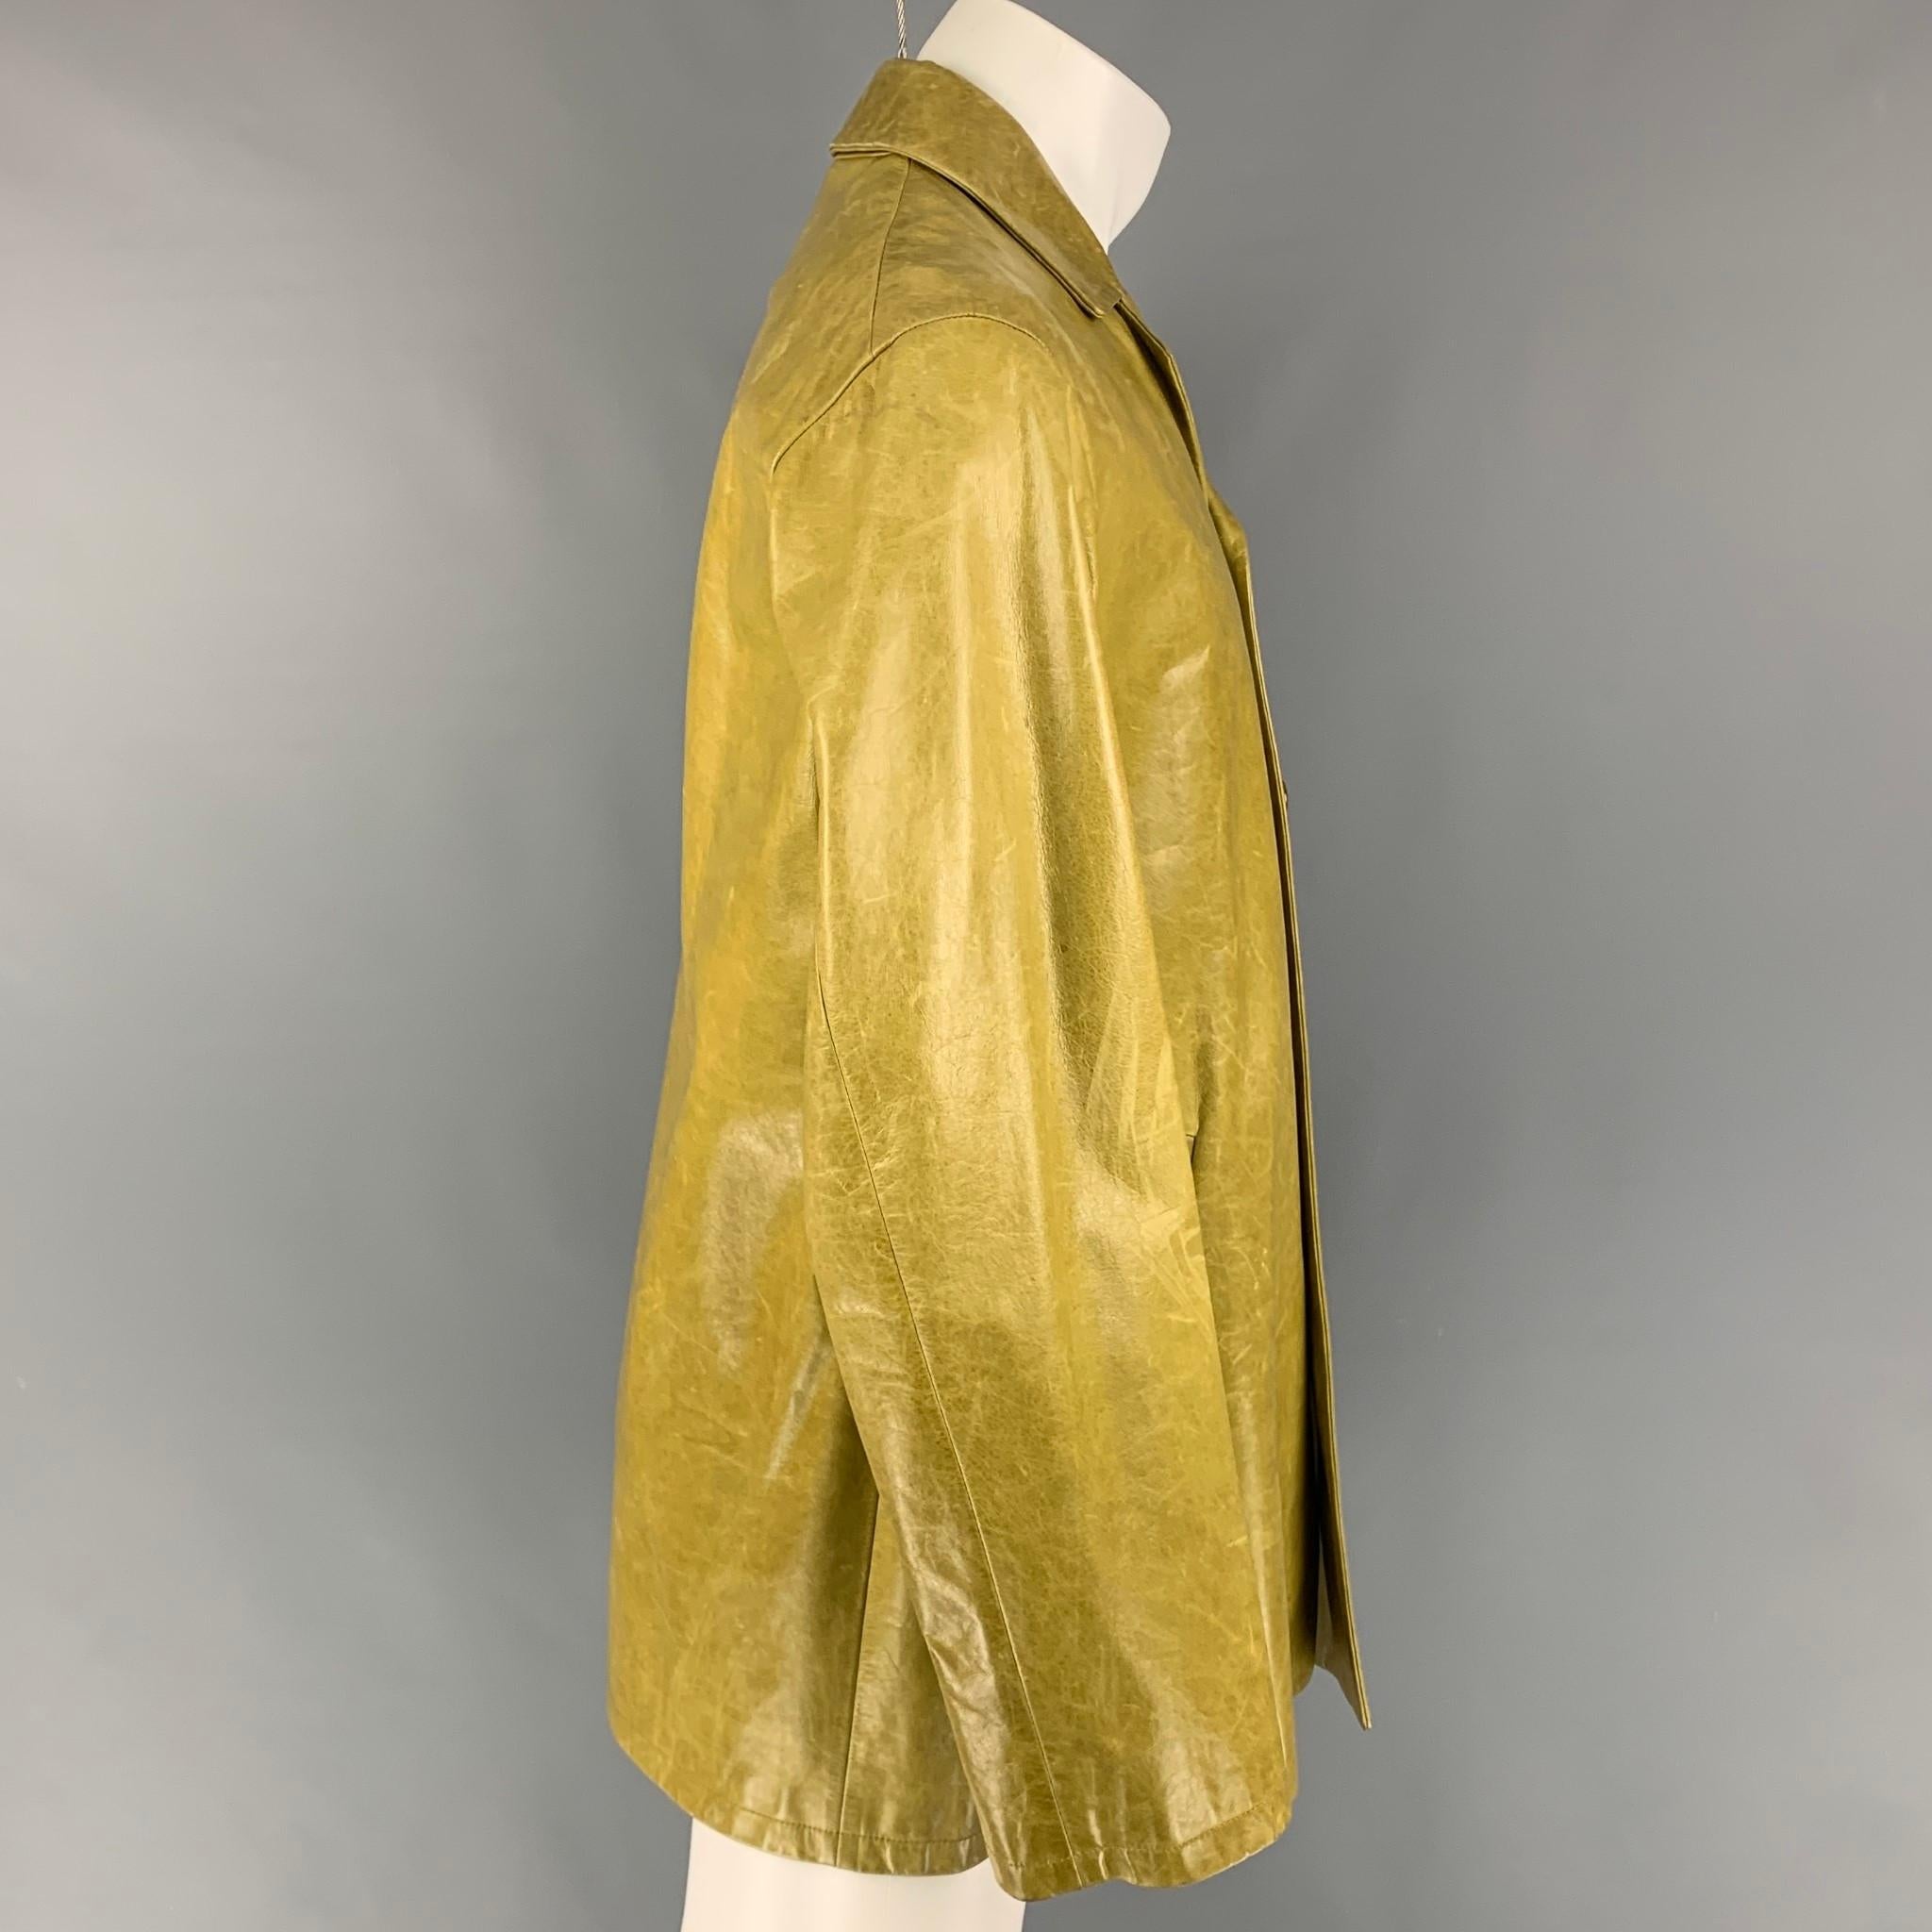 JIL SANDER coat comes in a chartreuse distressed leather with a full liner featuring a notch lapel, slit pockets, and a buttoned closure. Made in Italy.

Very Good Pre-Owned Condition.
Marked: 46

Measurements:

Shoulder: 18 in.
Chest: 44